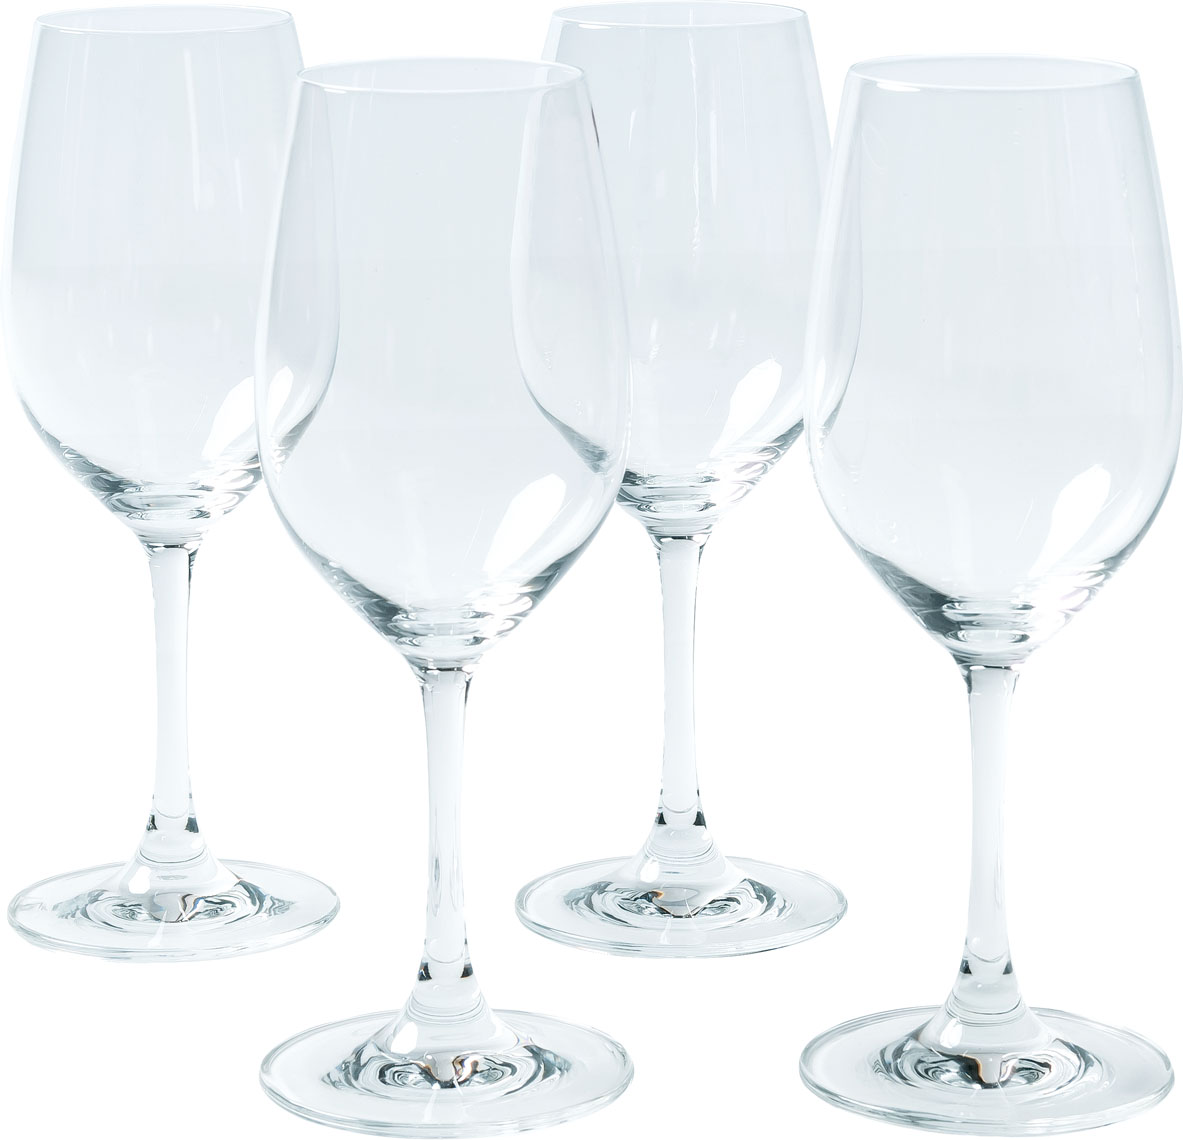 Glass for white wine Winelovers set of 4pcs.